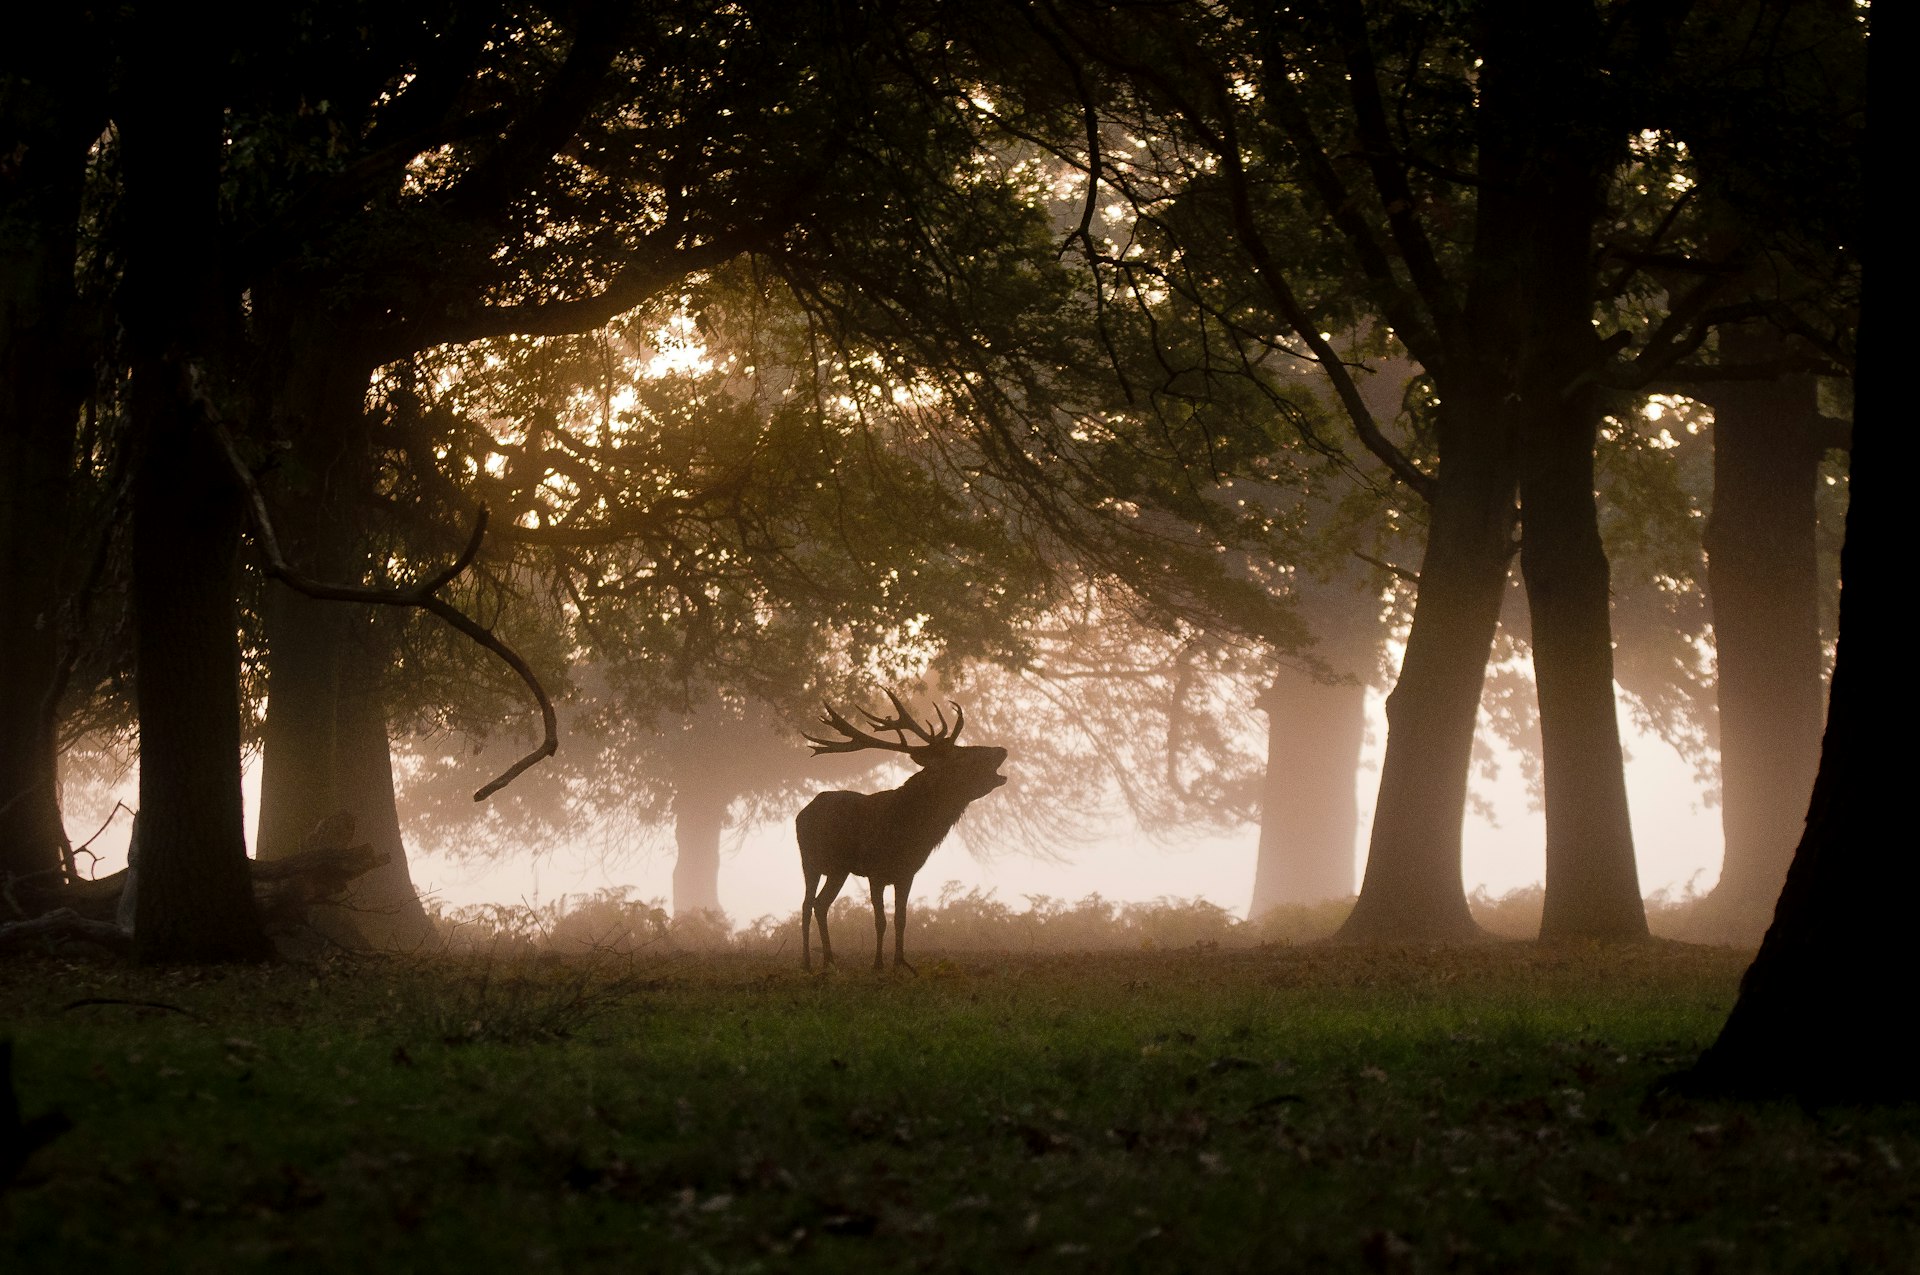 A stag in silhouette surrounded by woodland